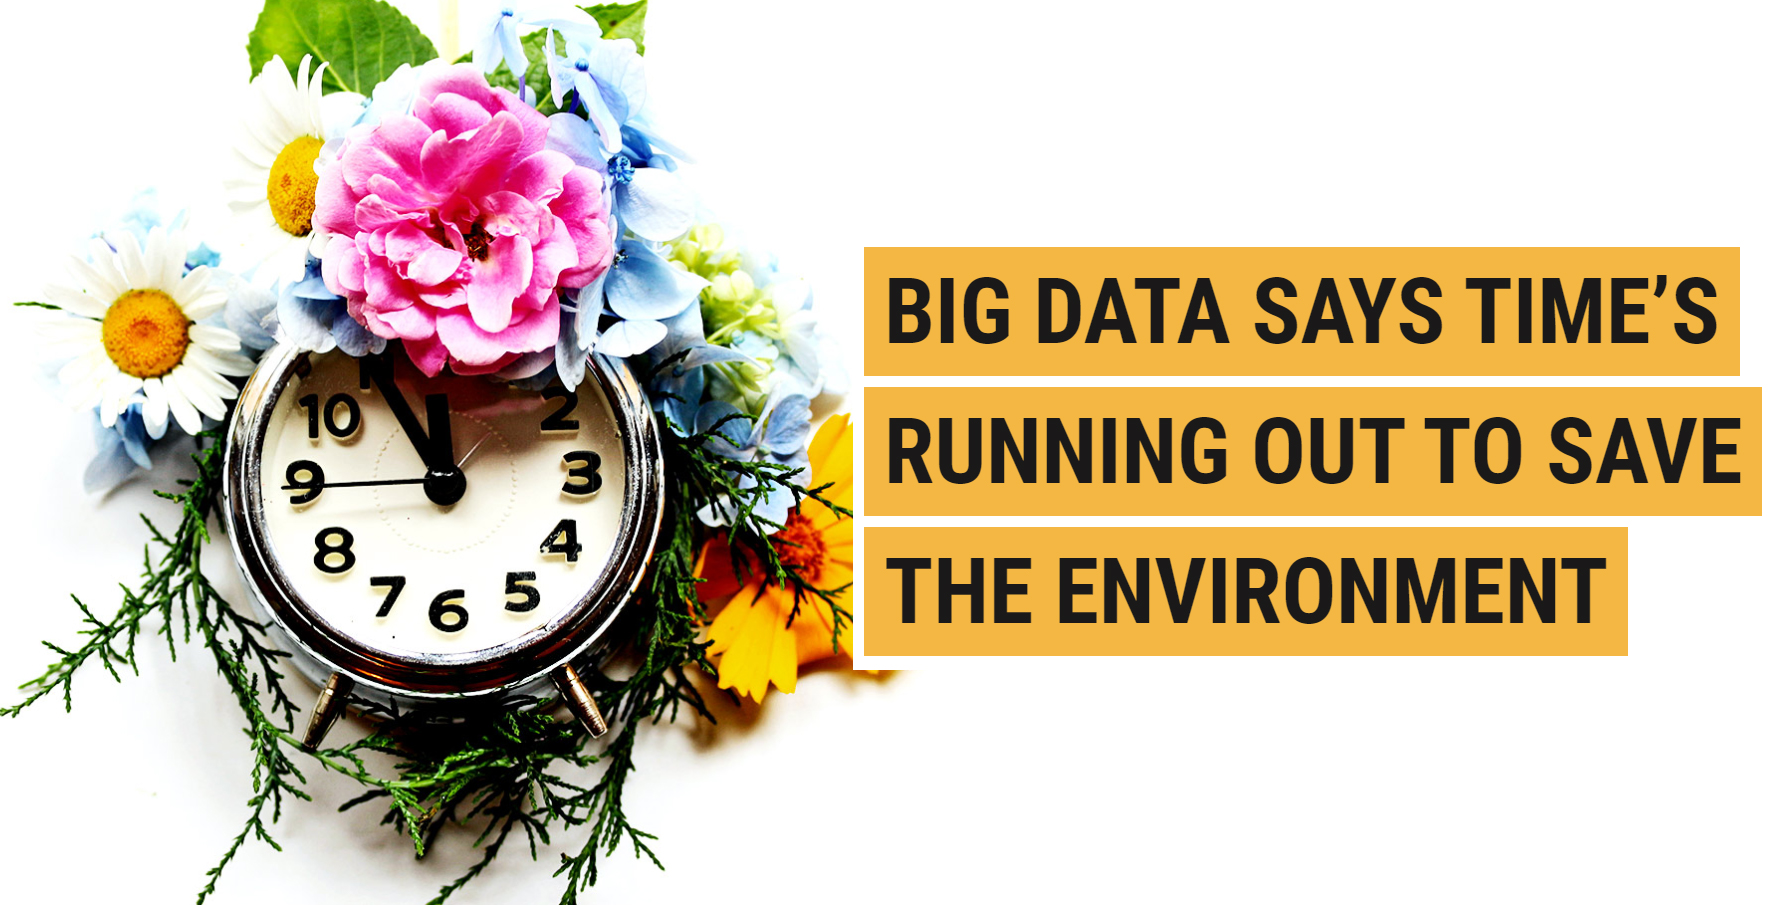 Big Data says time’s running out to save the Environment